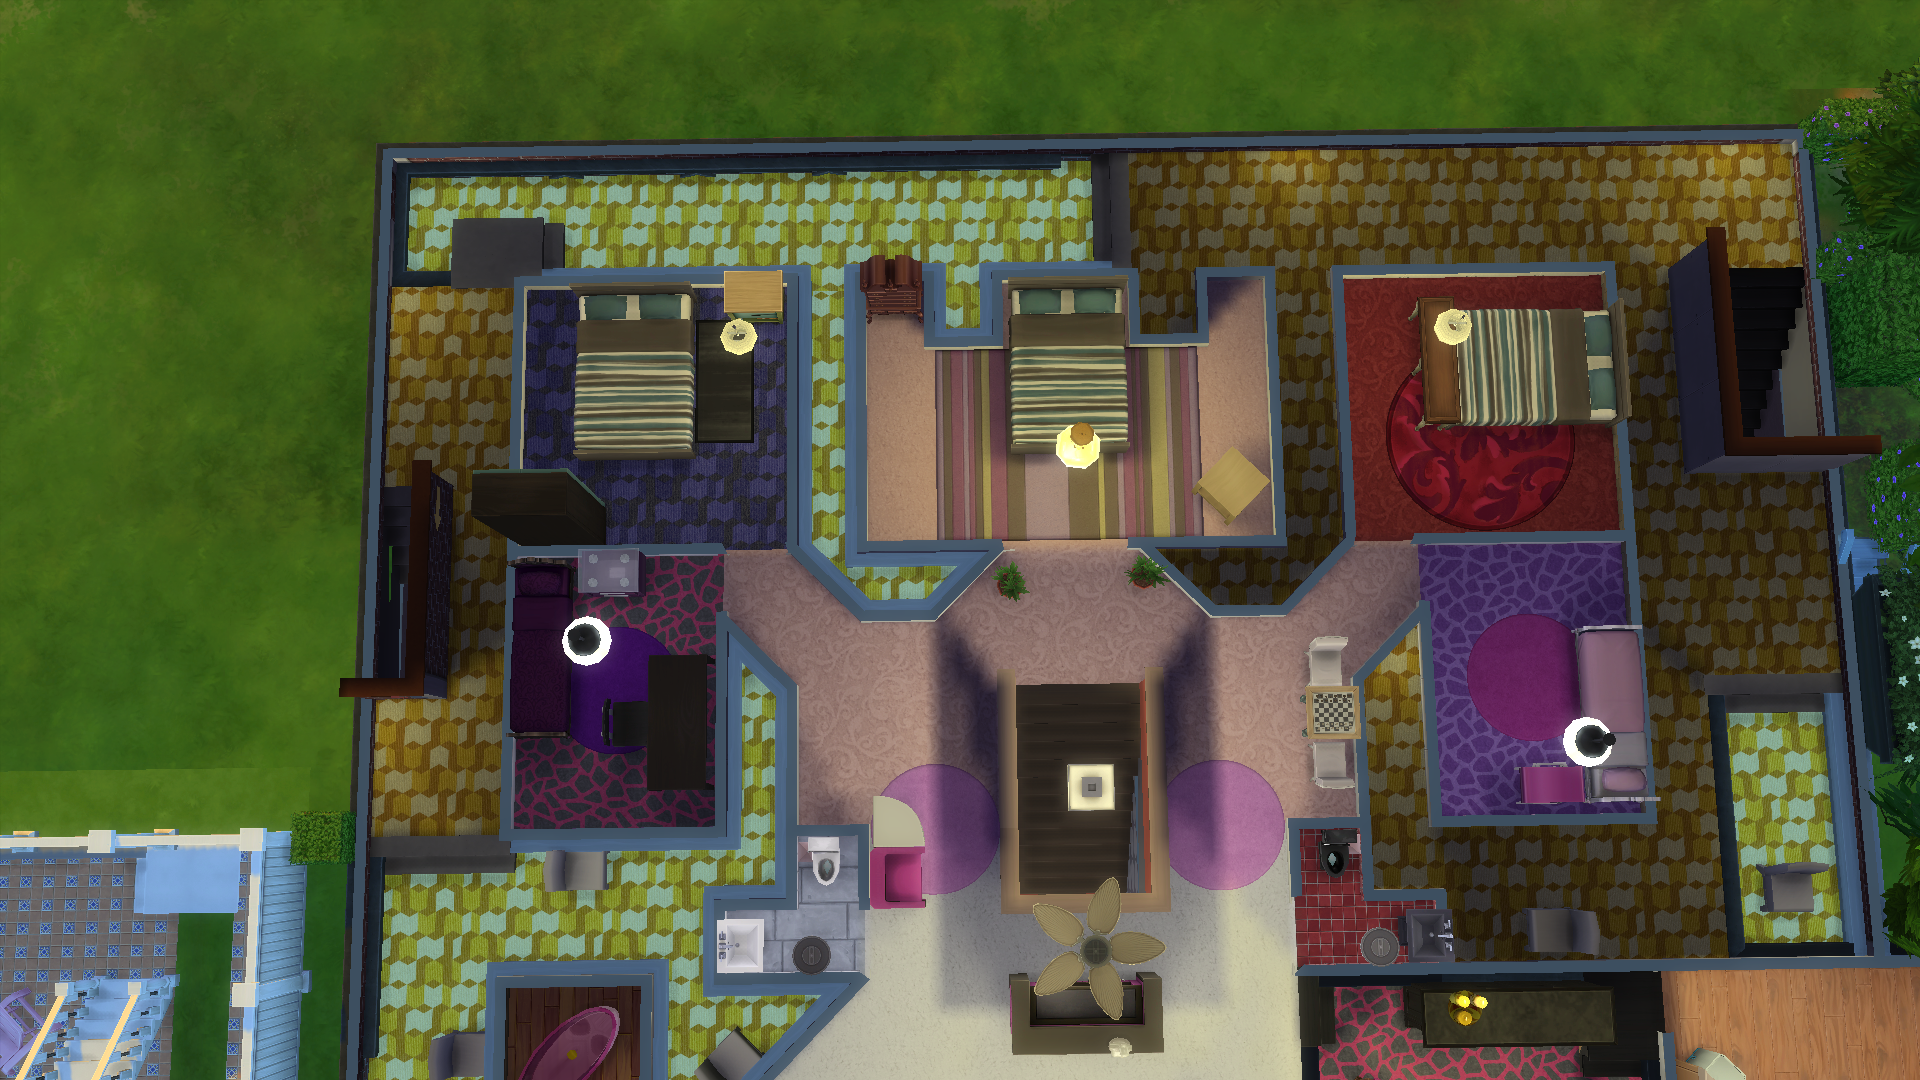 Voyeur Dorm or Big Brother XXX - Downloads - The Sims 4 pic